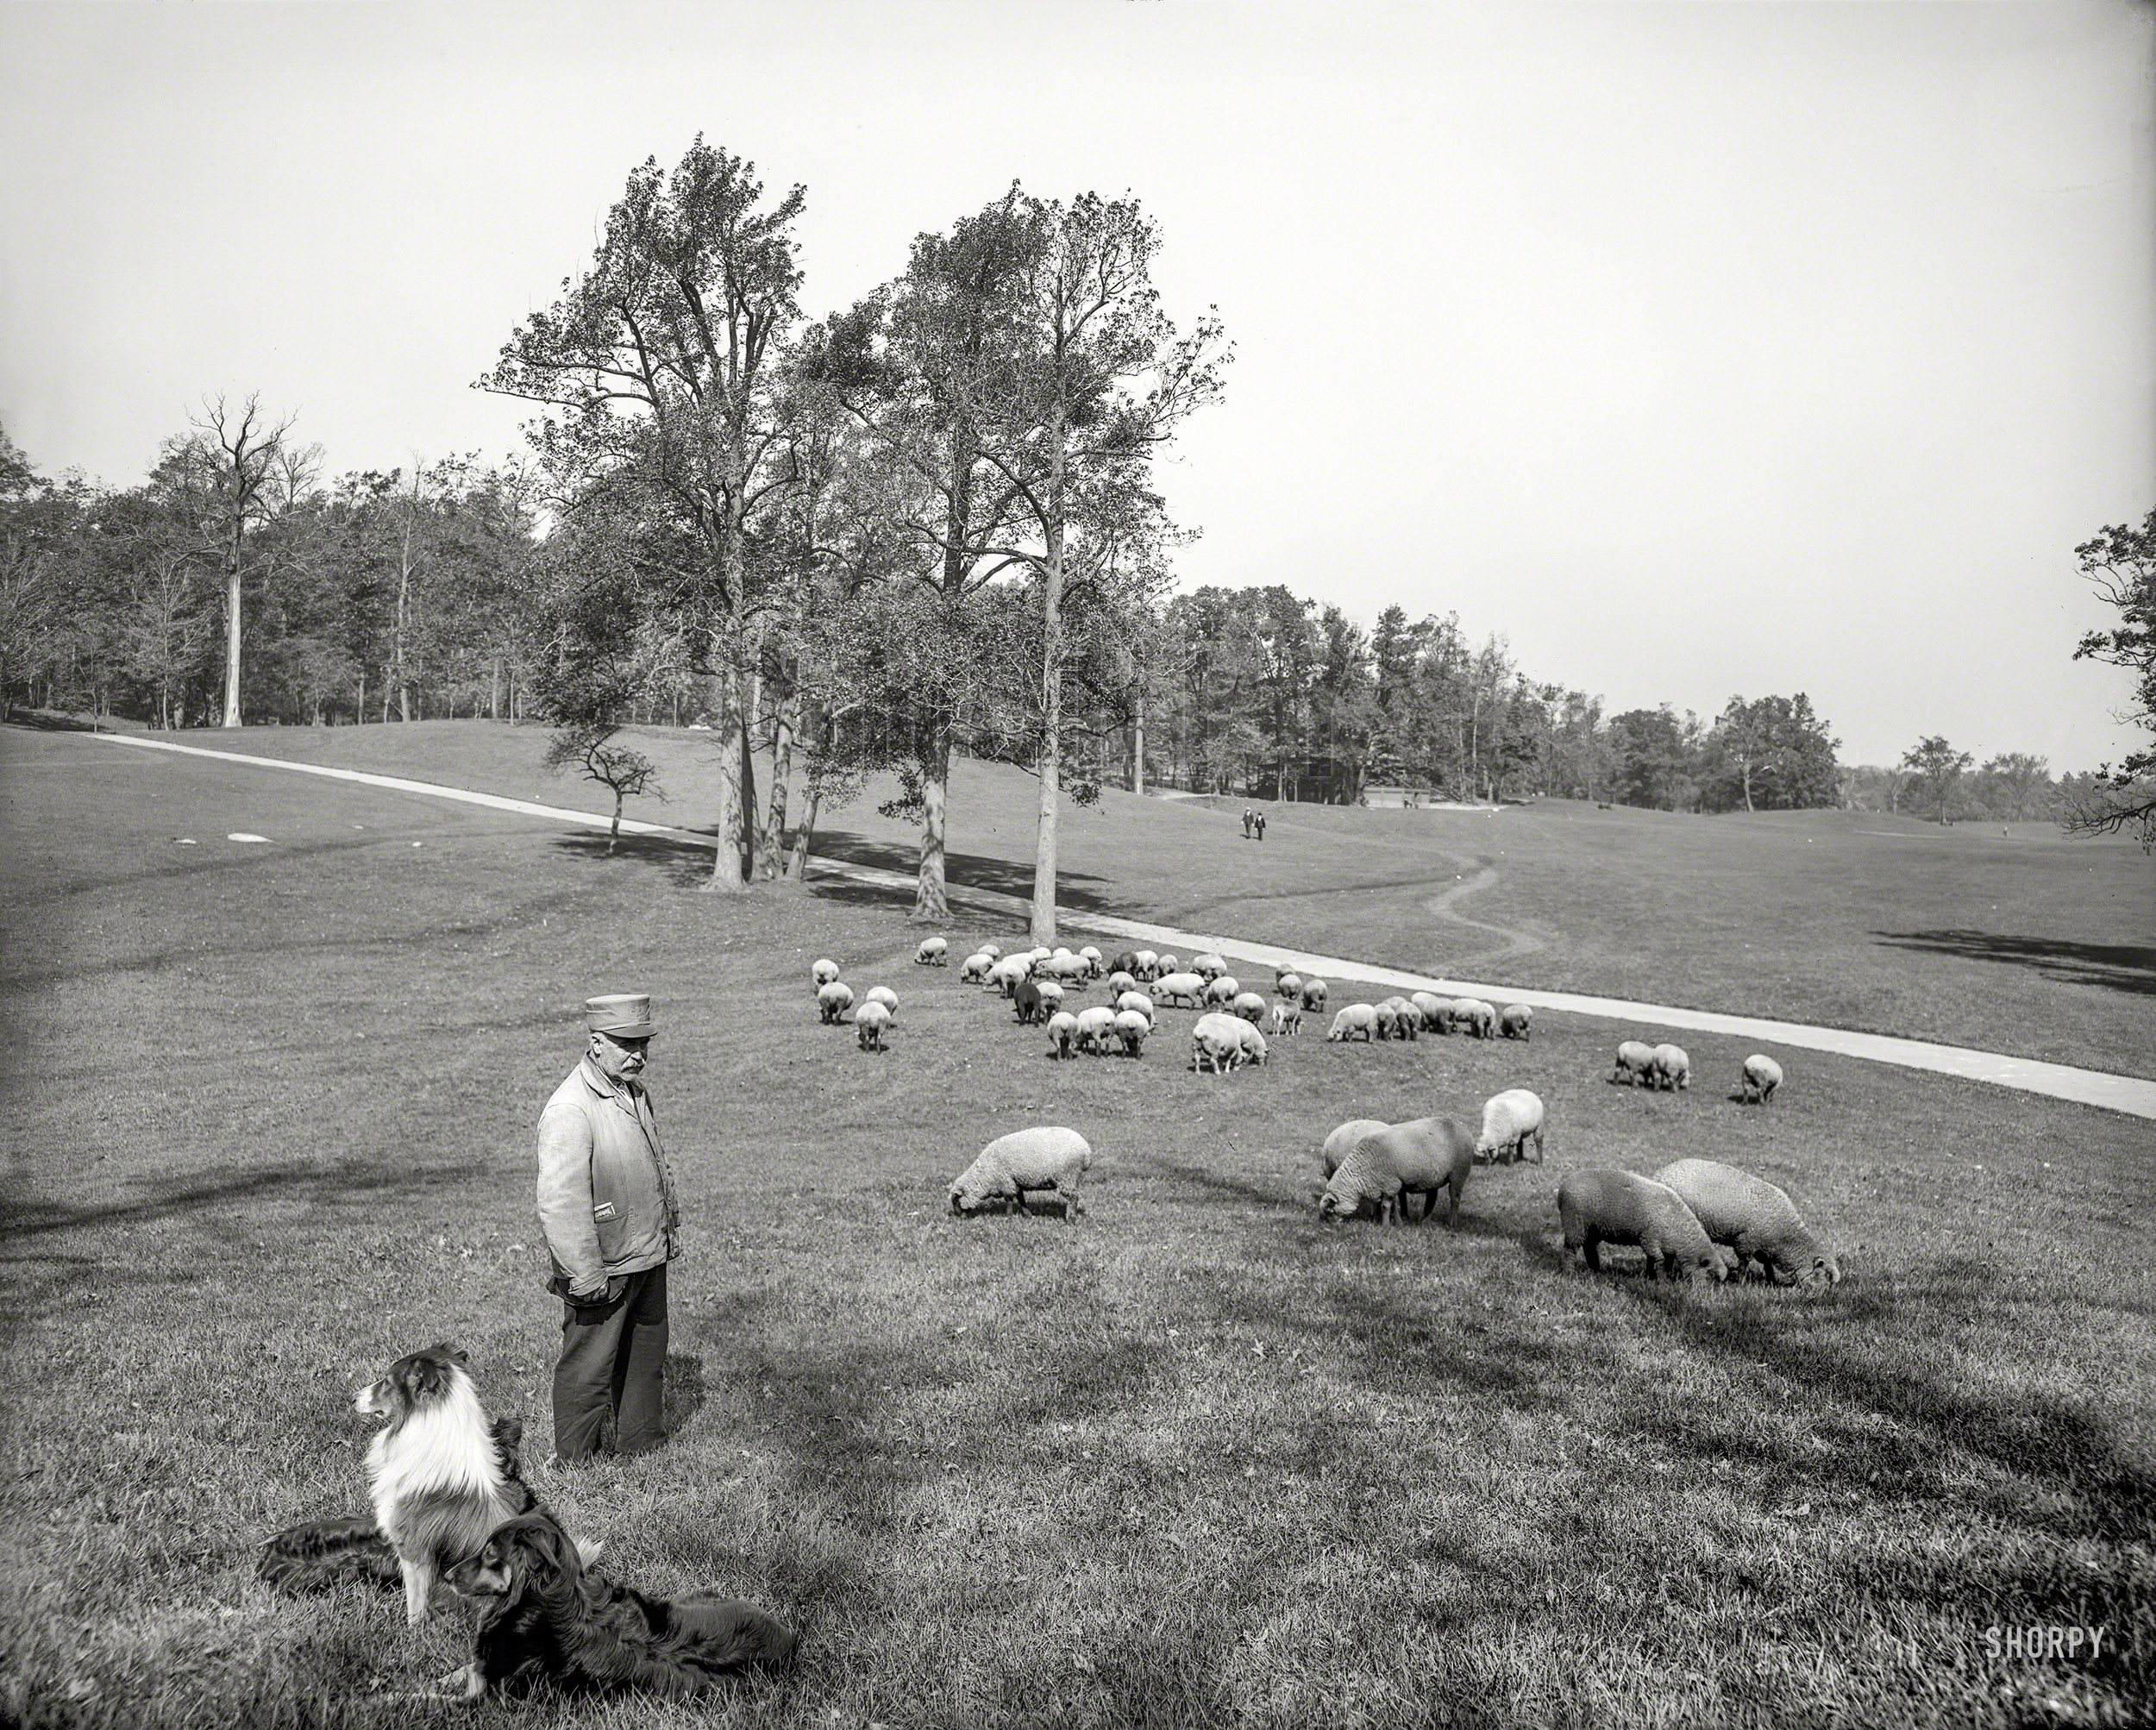 New York circa 1905. "Sheep in Prospect Park, Brooklyn." 8x10 inch dry plate glass negative, Detroit Publishing Company. View full size.